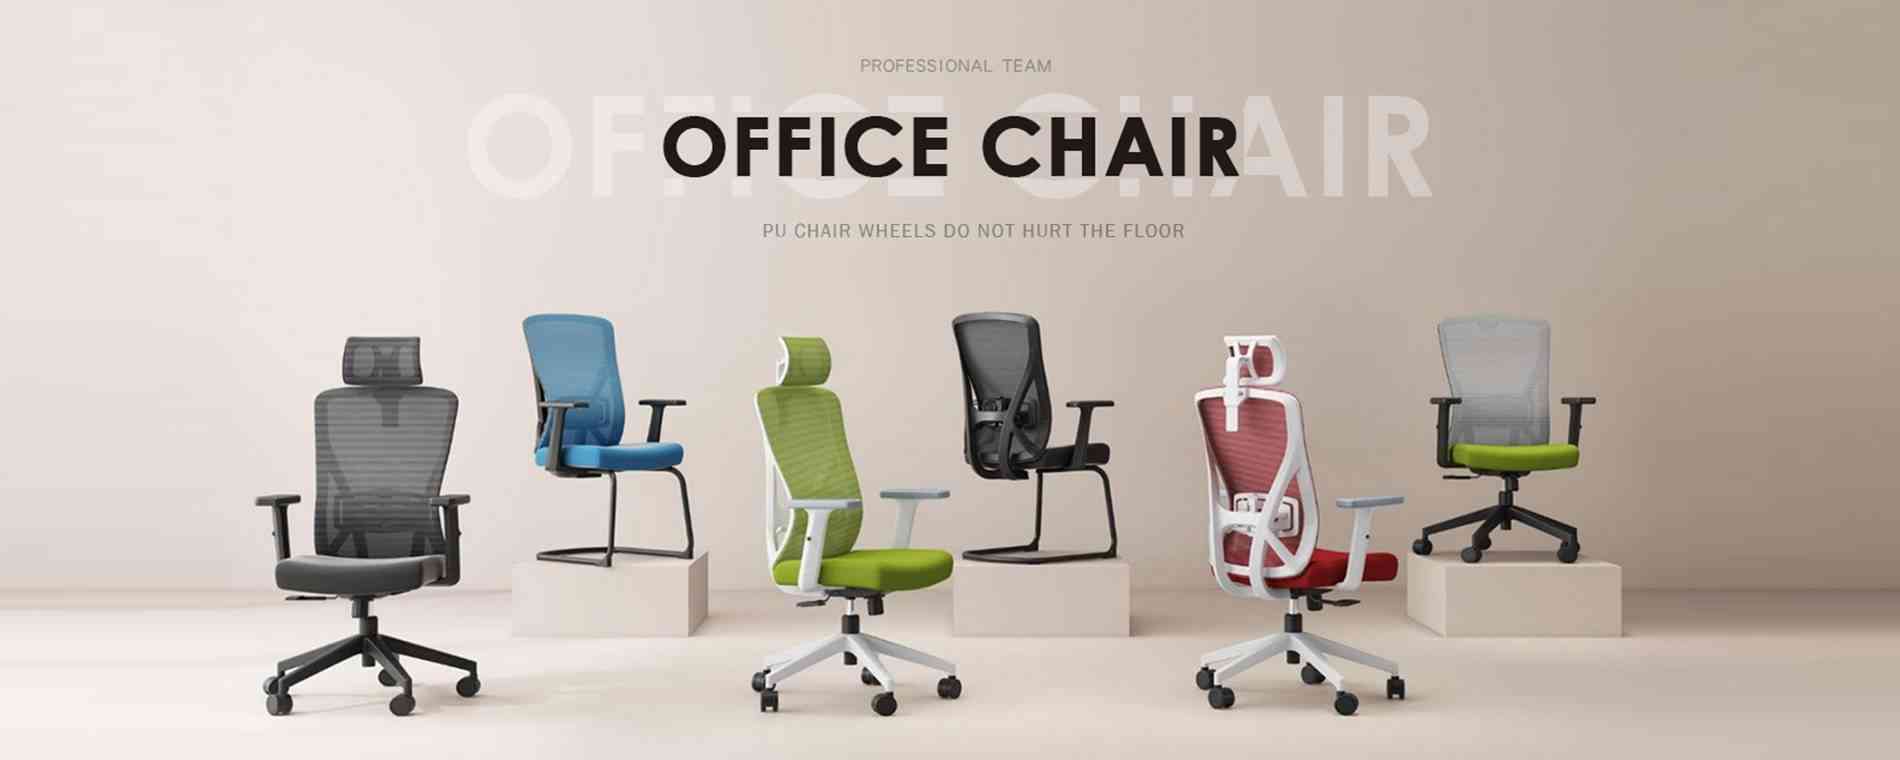 Office furniture solution experience